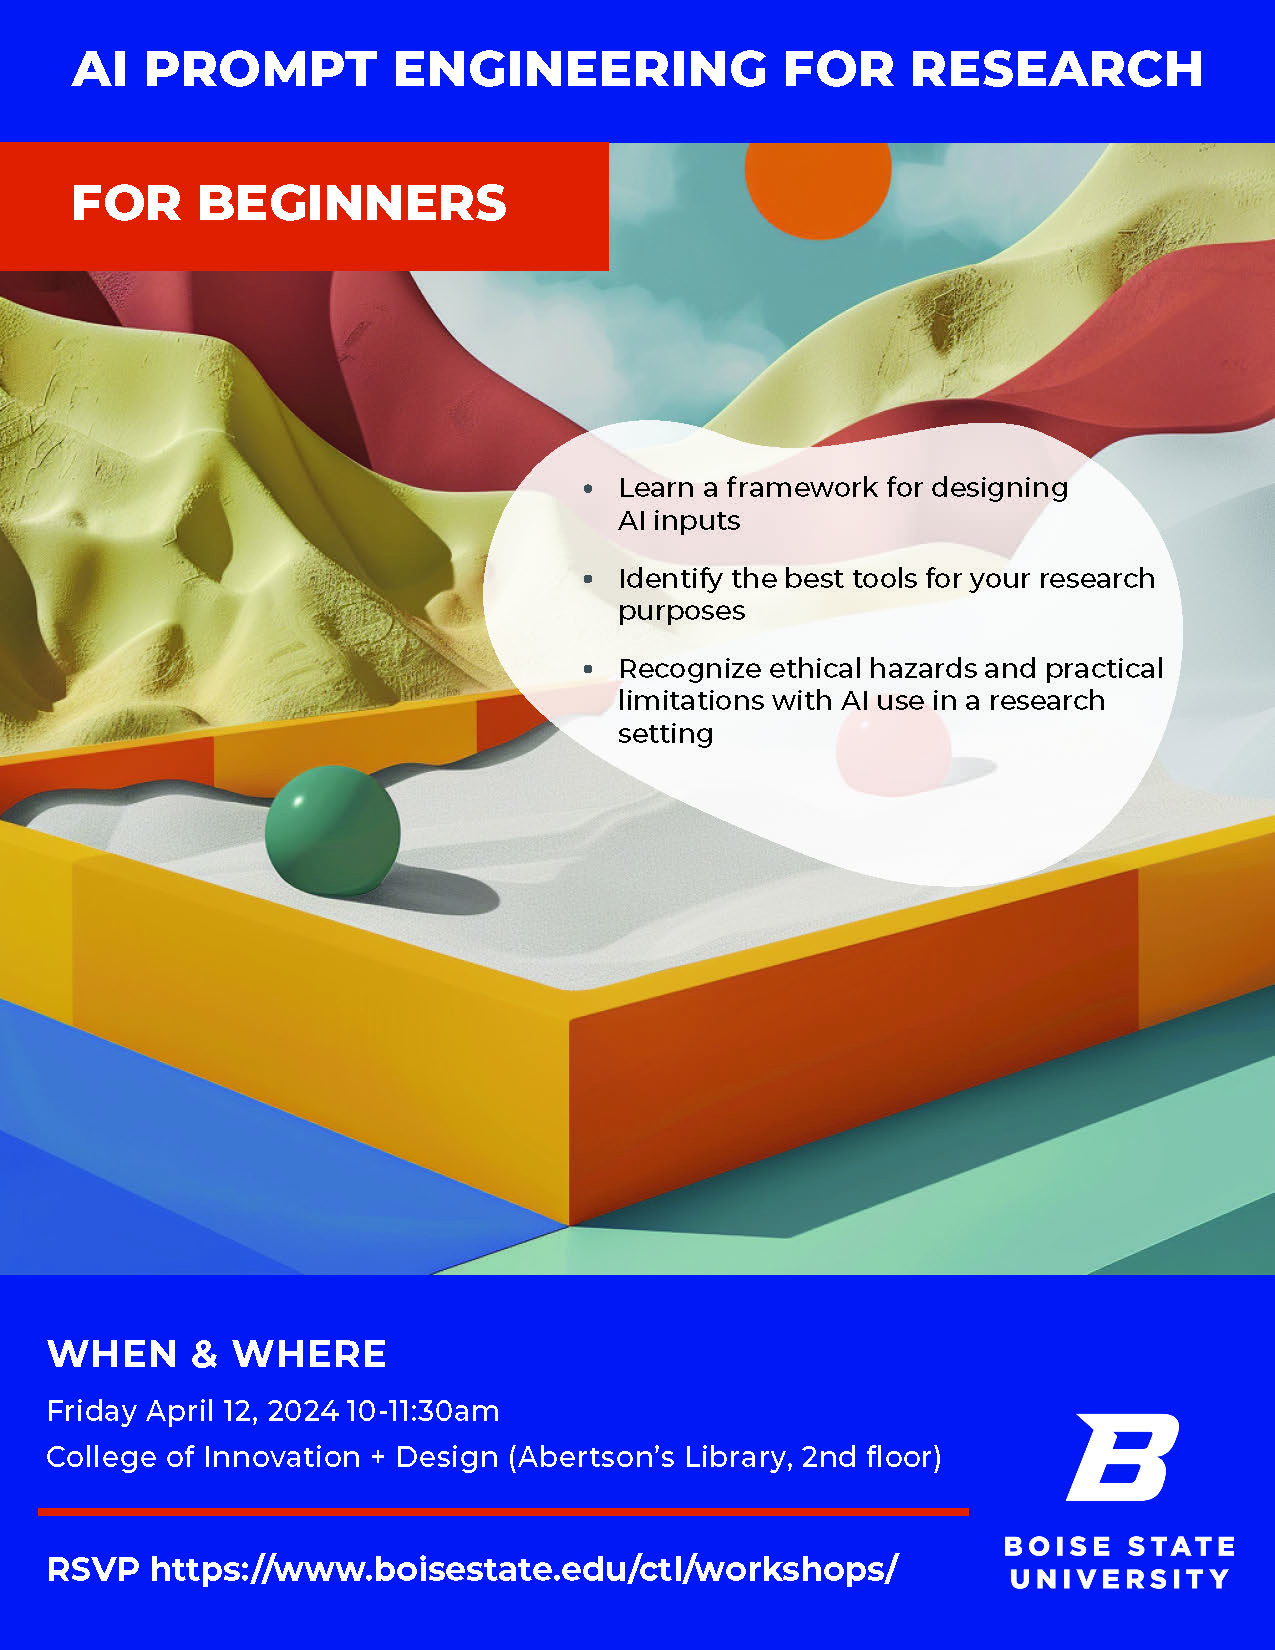 AI prompt Engineering for Research For Beginners - Learn a framework for designing AI inputs Identify the best tools for your research purposes Recognize ethical hazards and practical limitations with AI use in a research setting RSVP  https://www.boisestate.edu/ctl/workshops/